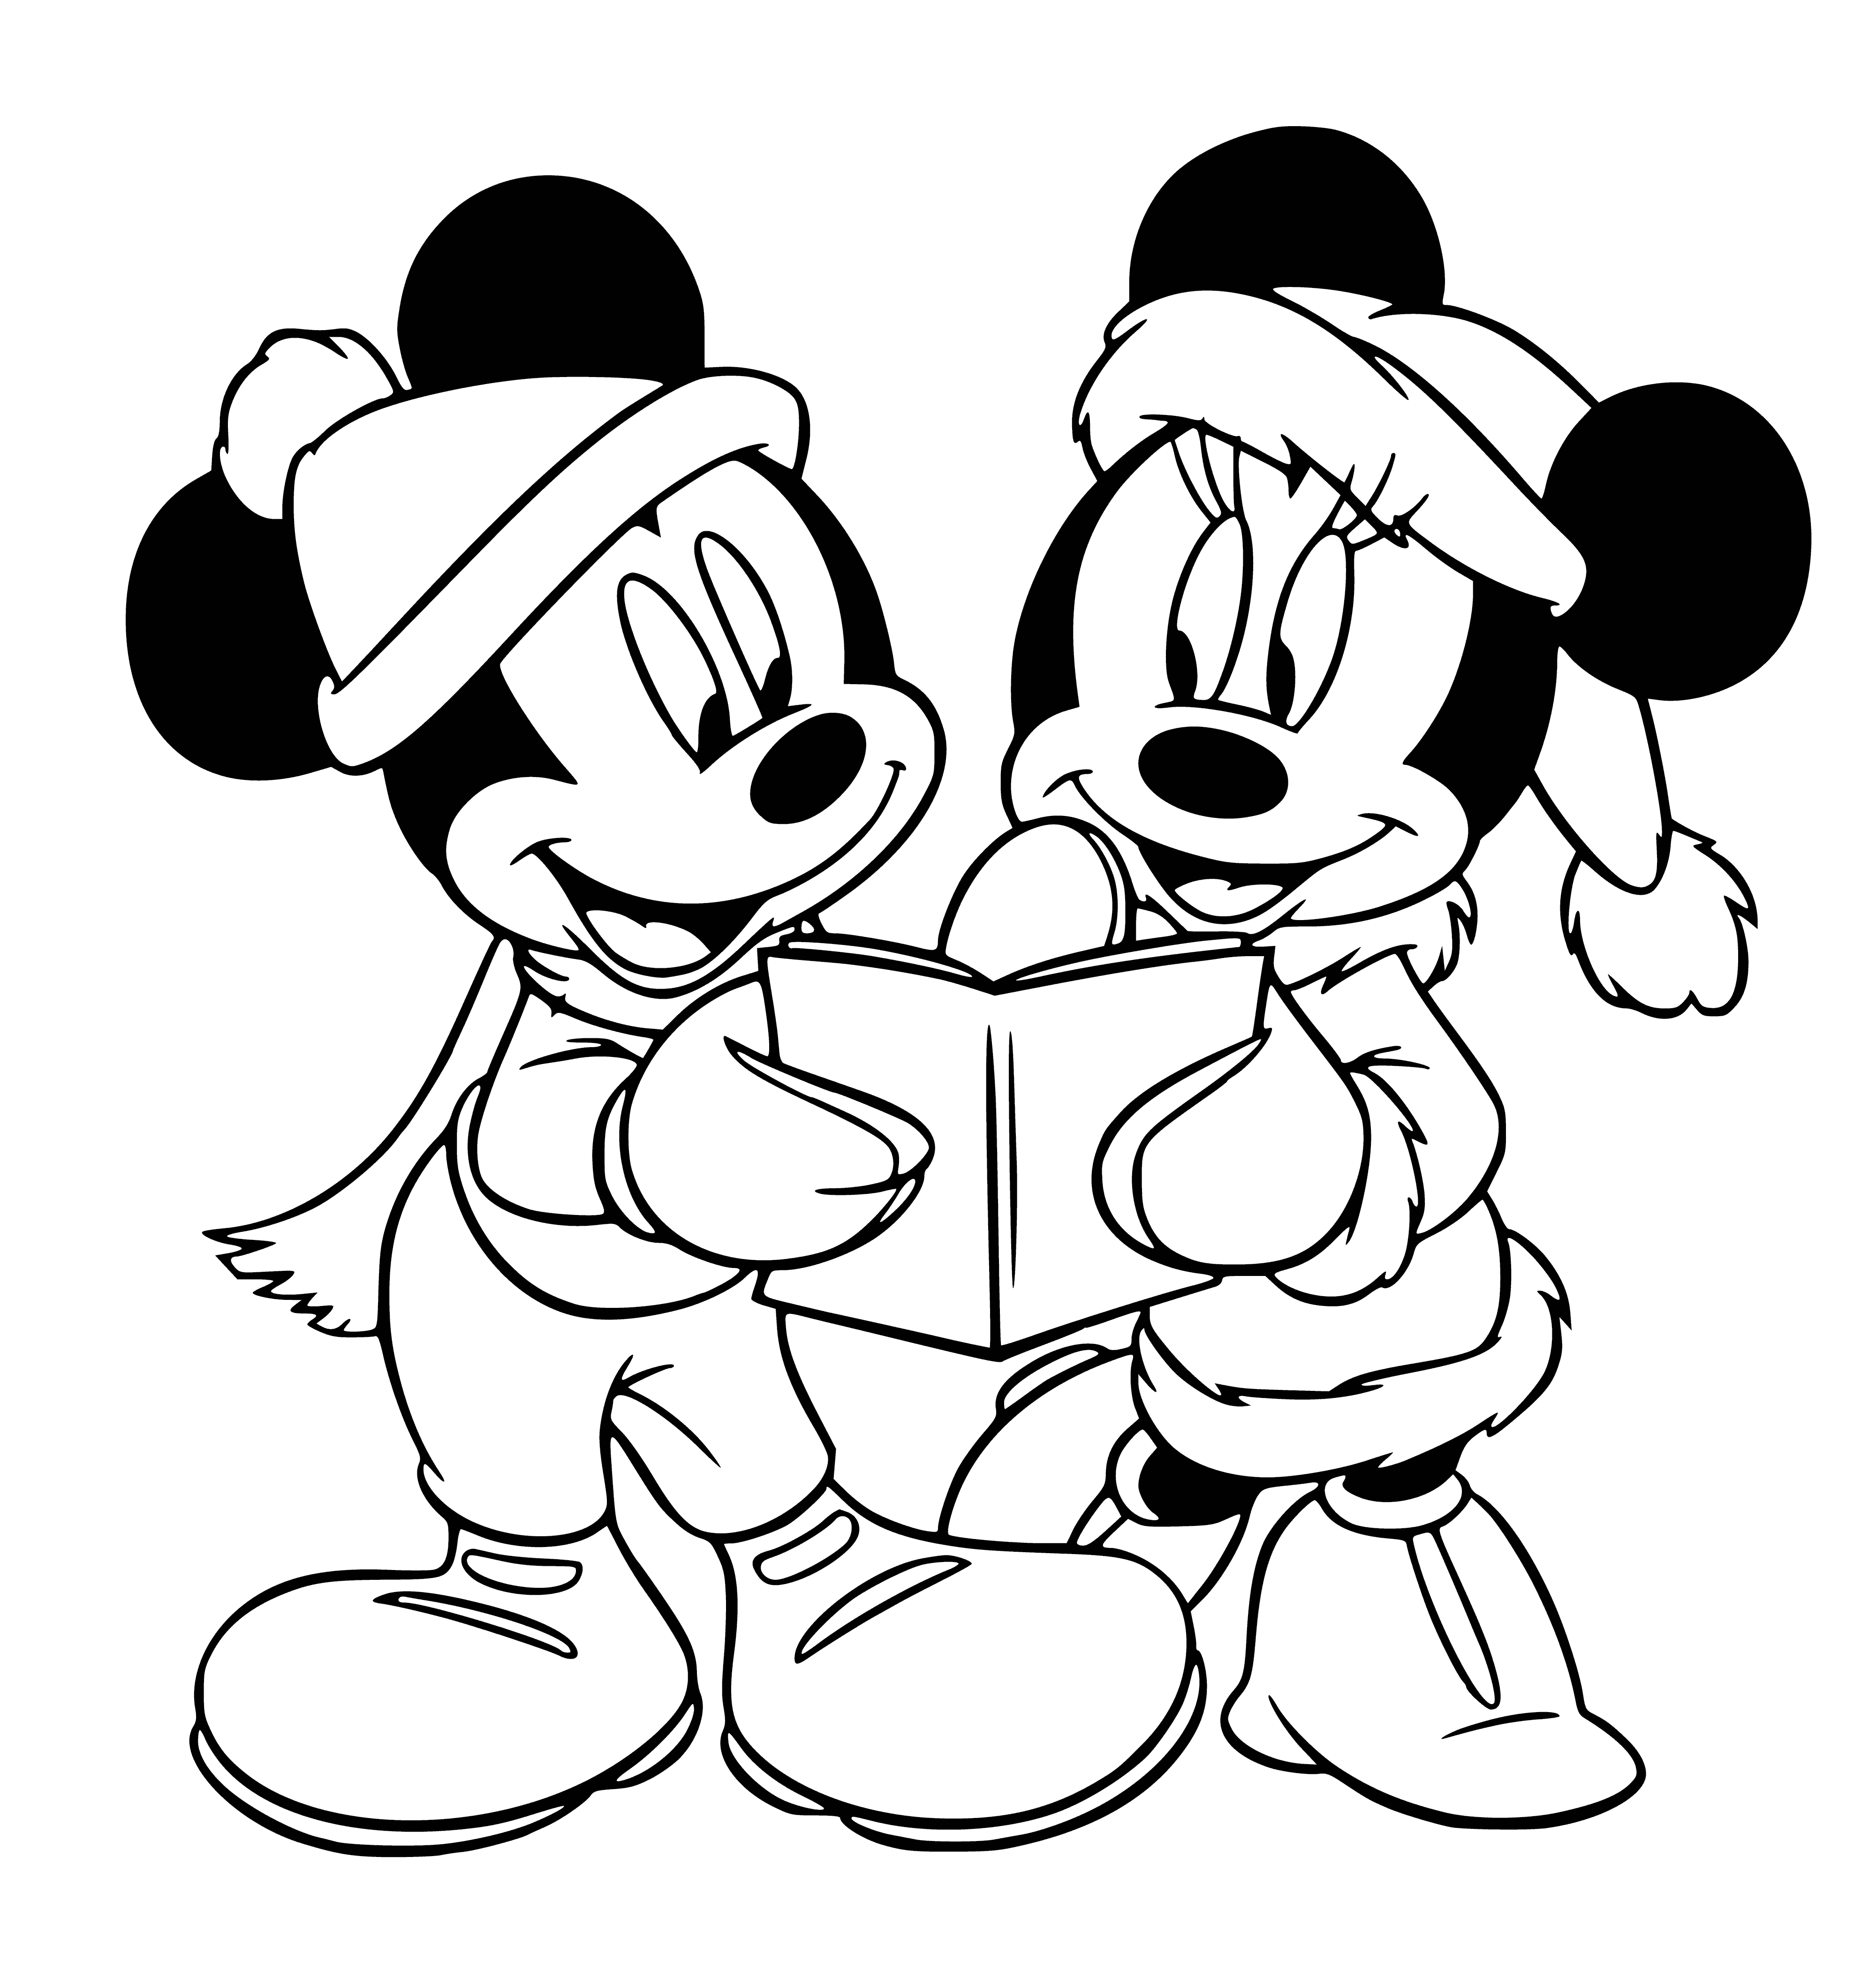 coloring page: Mini and Mickey Mouse are celebrating the New Year with festive hats and noisemakers- filled with joy and excitement!